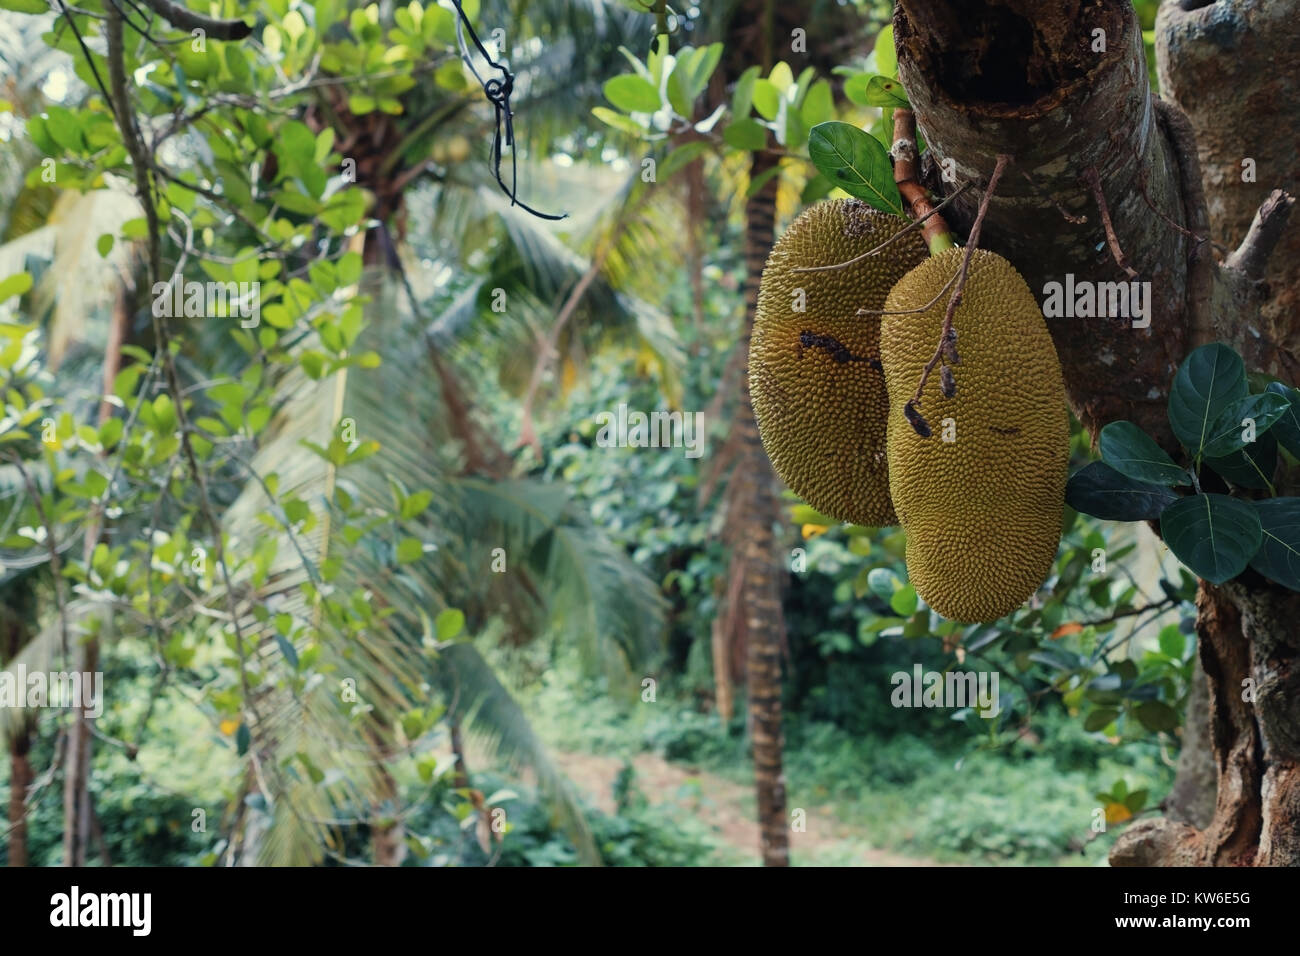 Big jackfruits on a tree in Indonesia Bali. Smelly and sweet tropical food Stock Photo